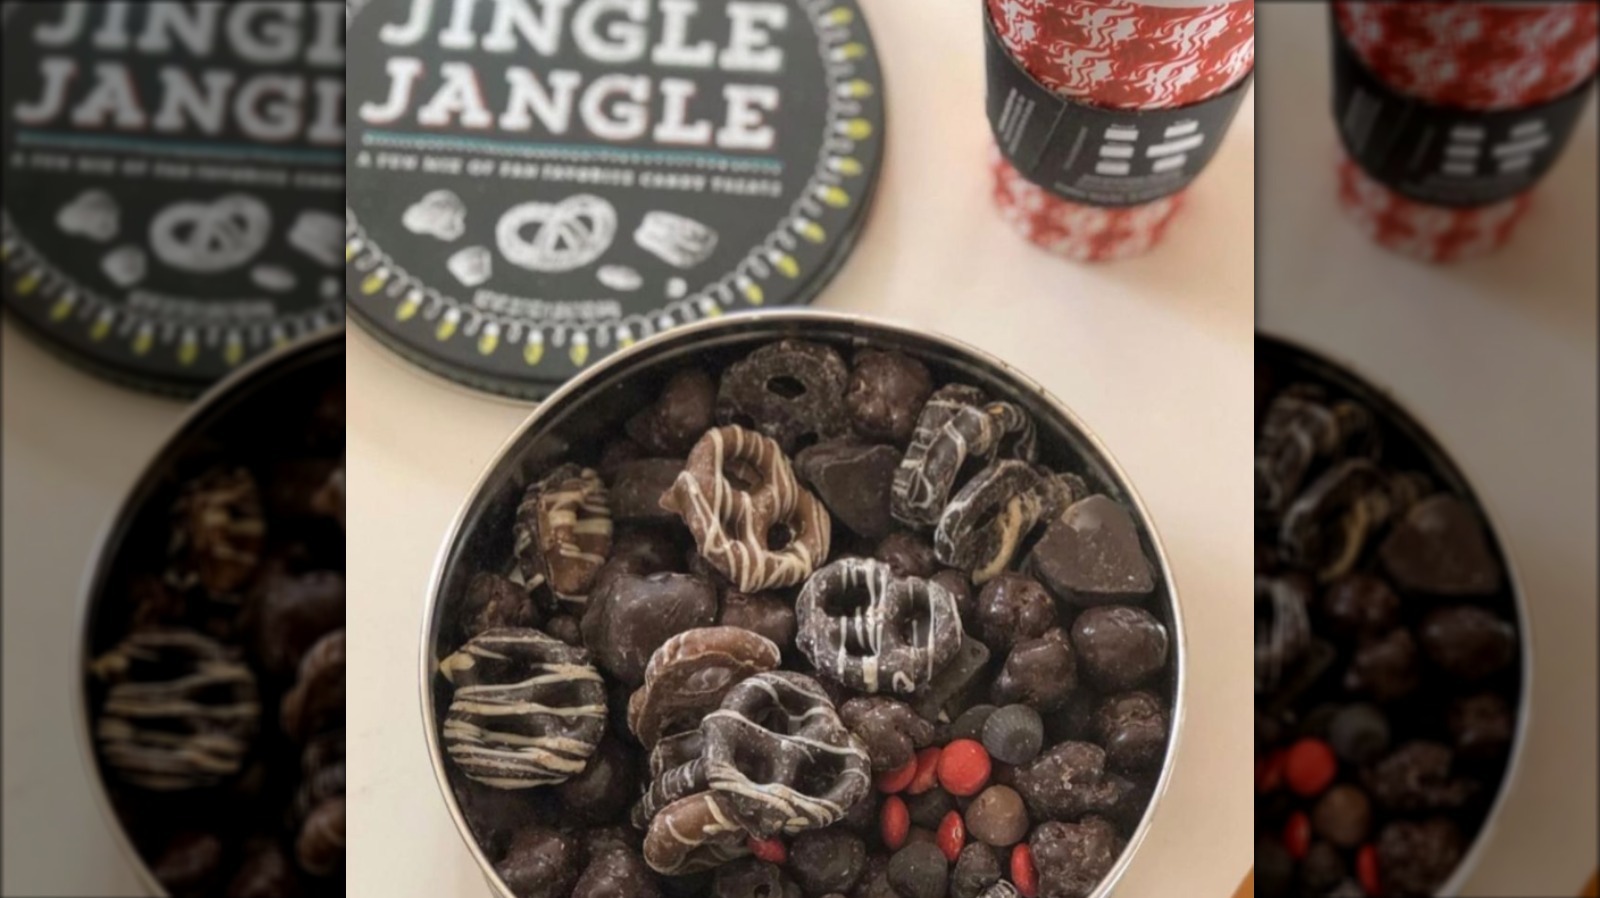 Trader Joe's Jingle Jangle Is Back For 2021 And Fans Are Freaking Out